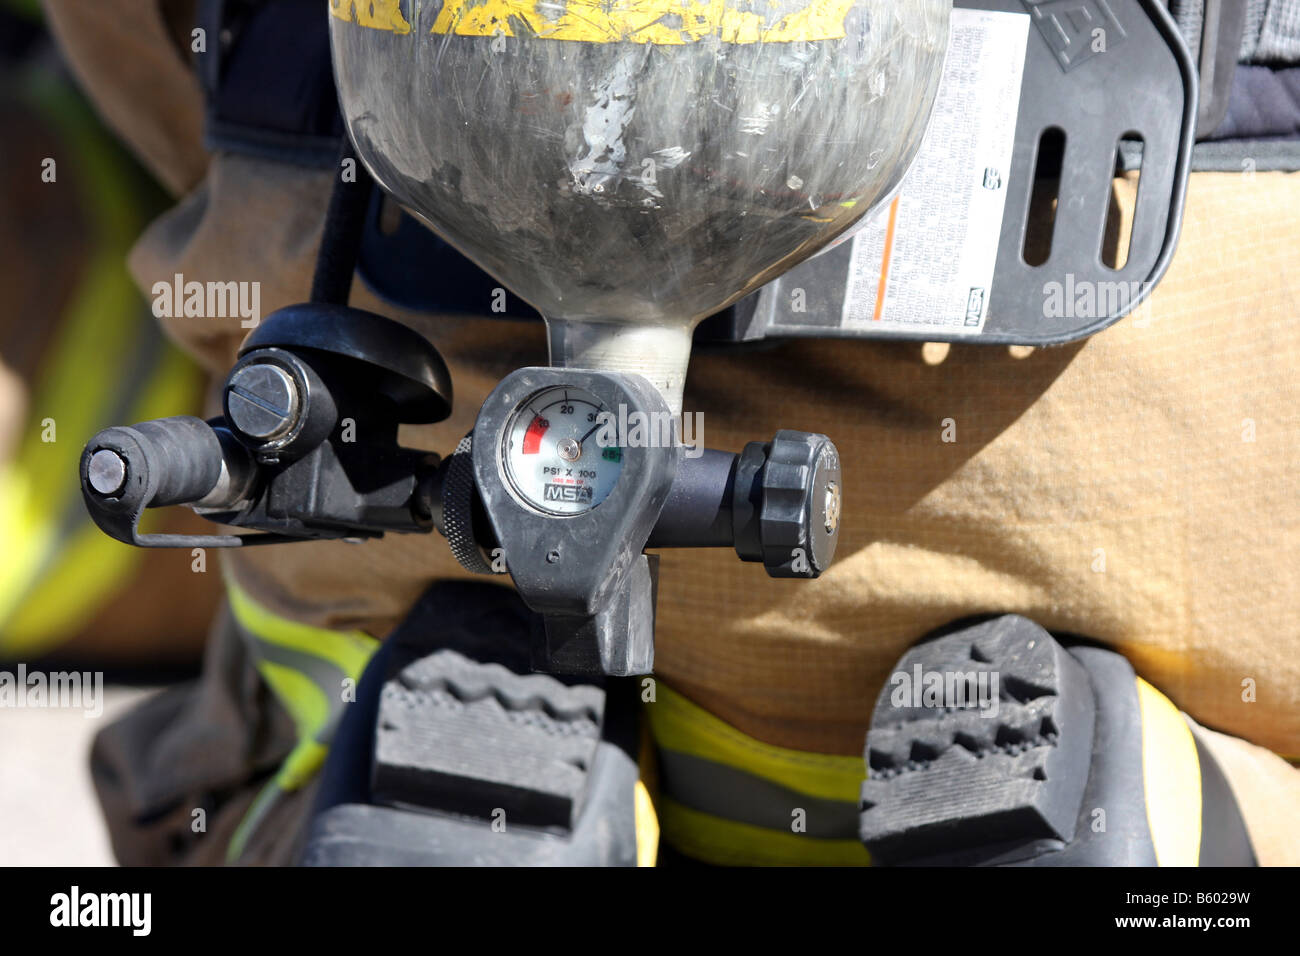 The oxygen air tank valve indicating the amount of air pressure still left in the tank for breathing by a firefighter Stock Photo